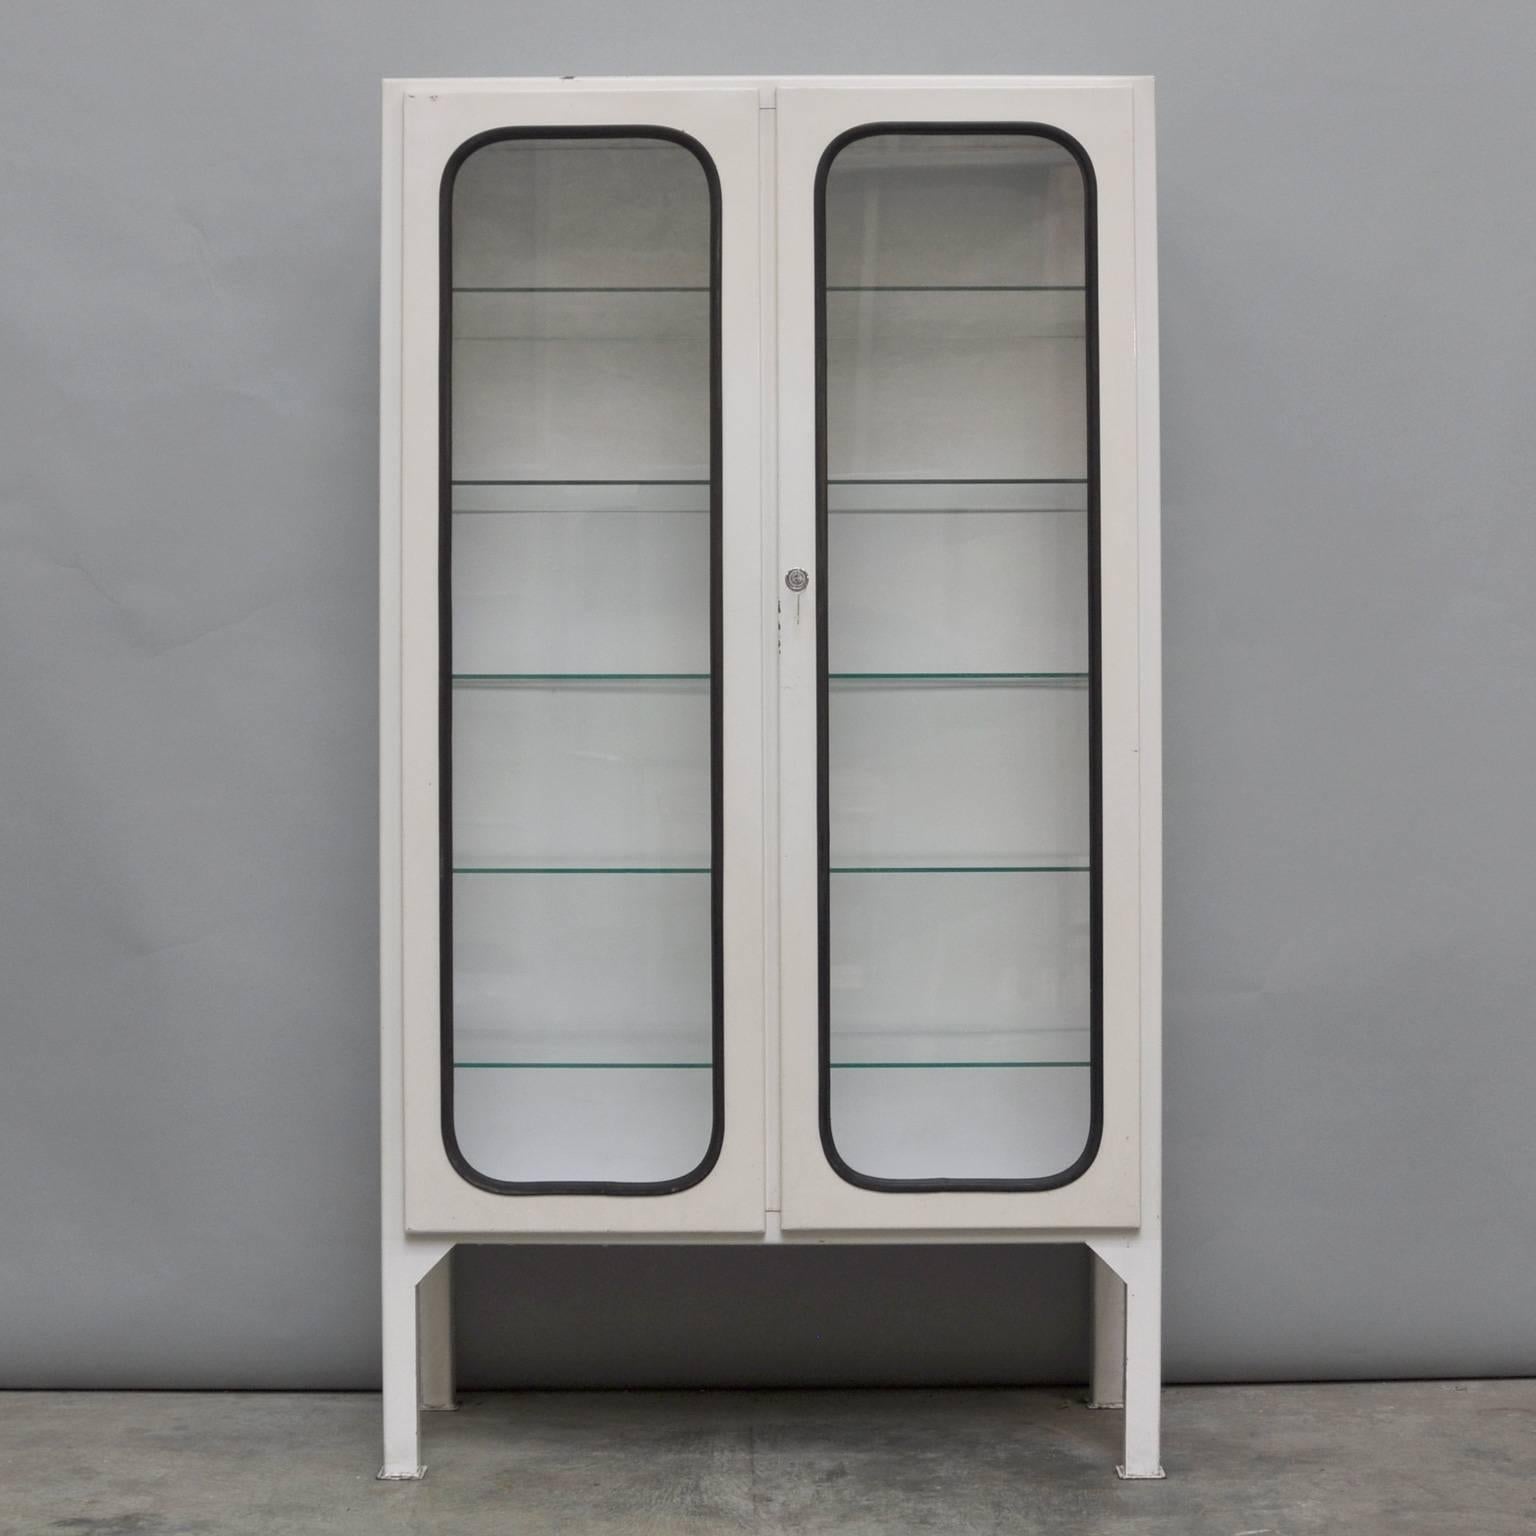 This medicine cabinet was designed in the 1970s and was produced circa 1975 in Hungary. The piece is made from iron and antique glass, and the glass is held by a black rubber strip. The cabinet features five original adjustable glass shelves and a